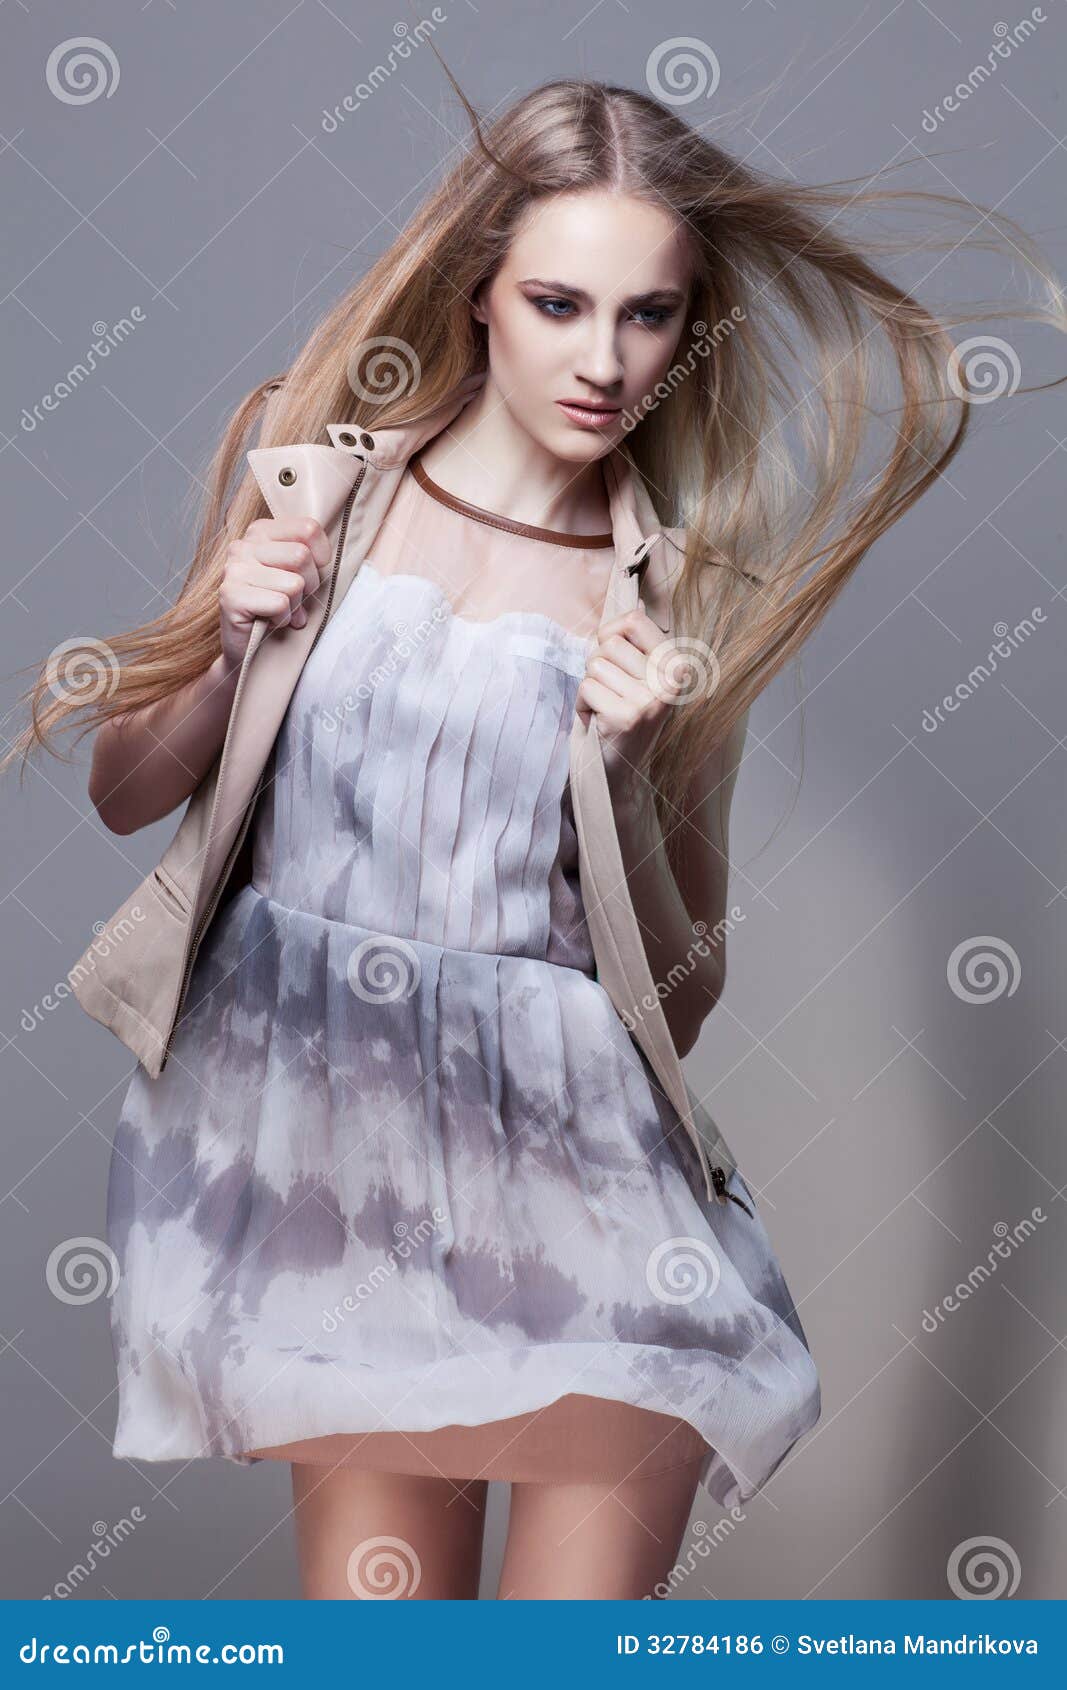 Girl in Short Dress and Waistcoat Stock Photo - Image of human, adult ...